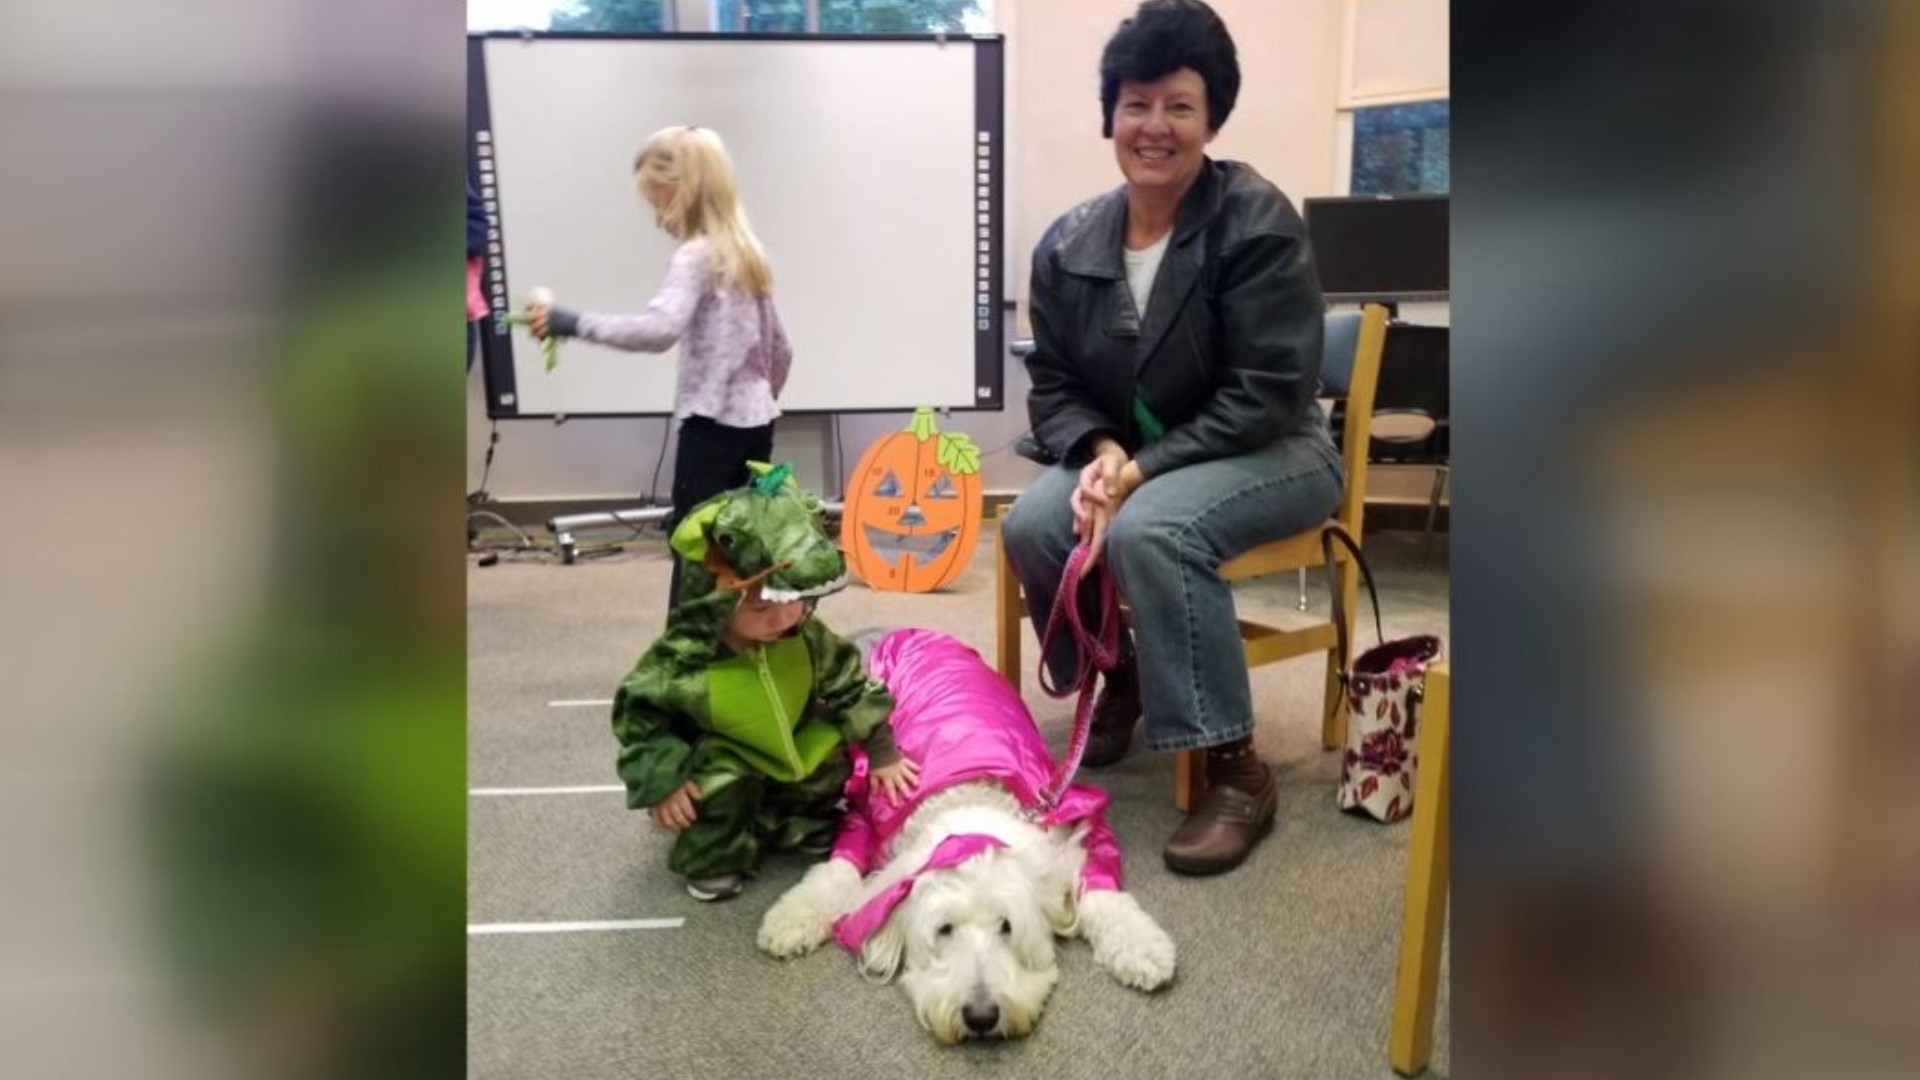 Many pet parents have often said: we don't choose our pets; they choose us. For one Bradford County woman, her Goldendoodle is the one who rescued her.